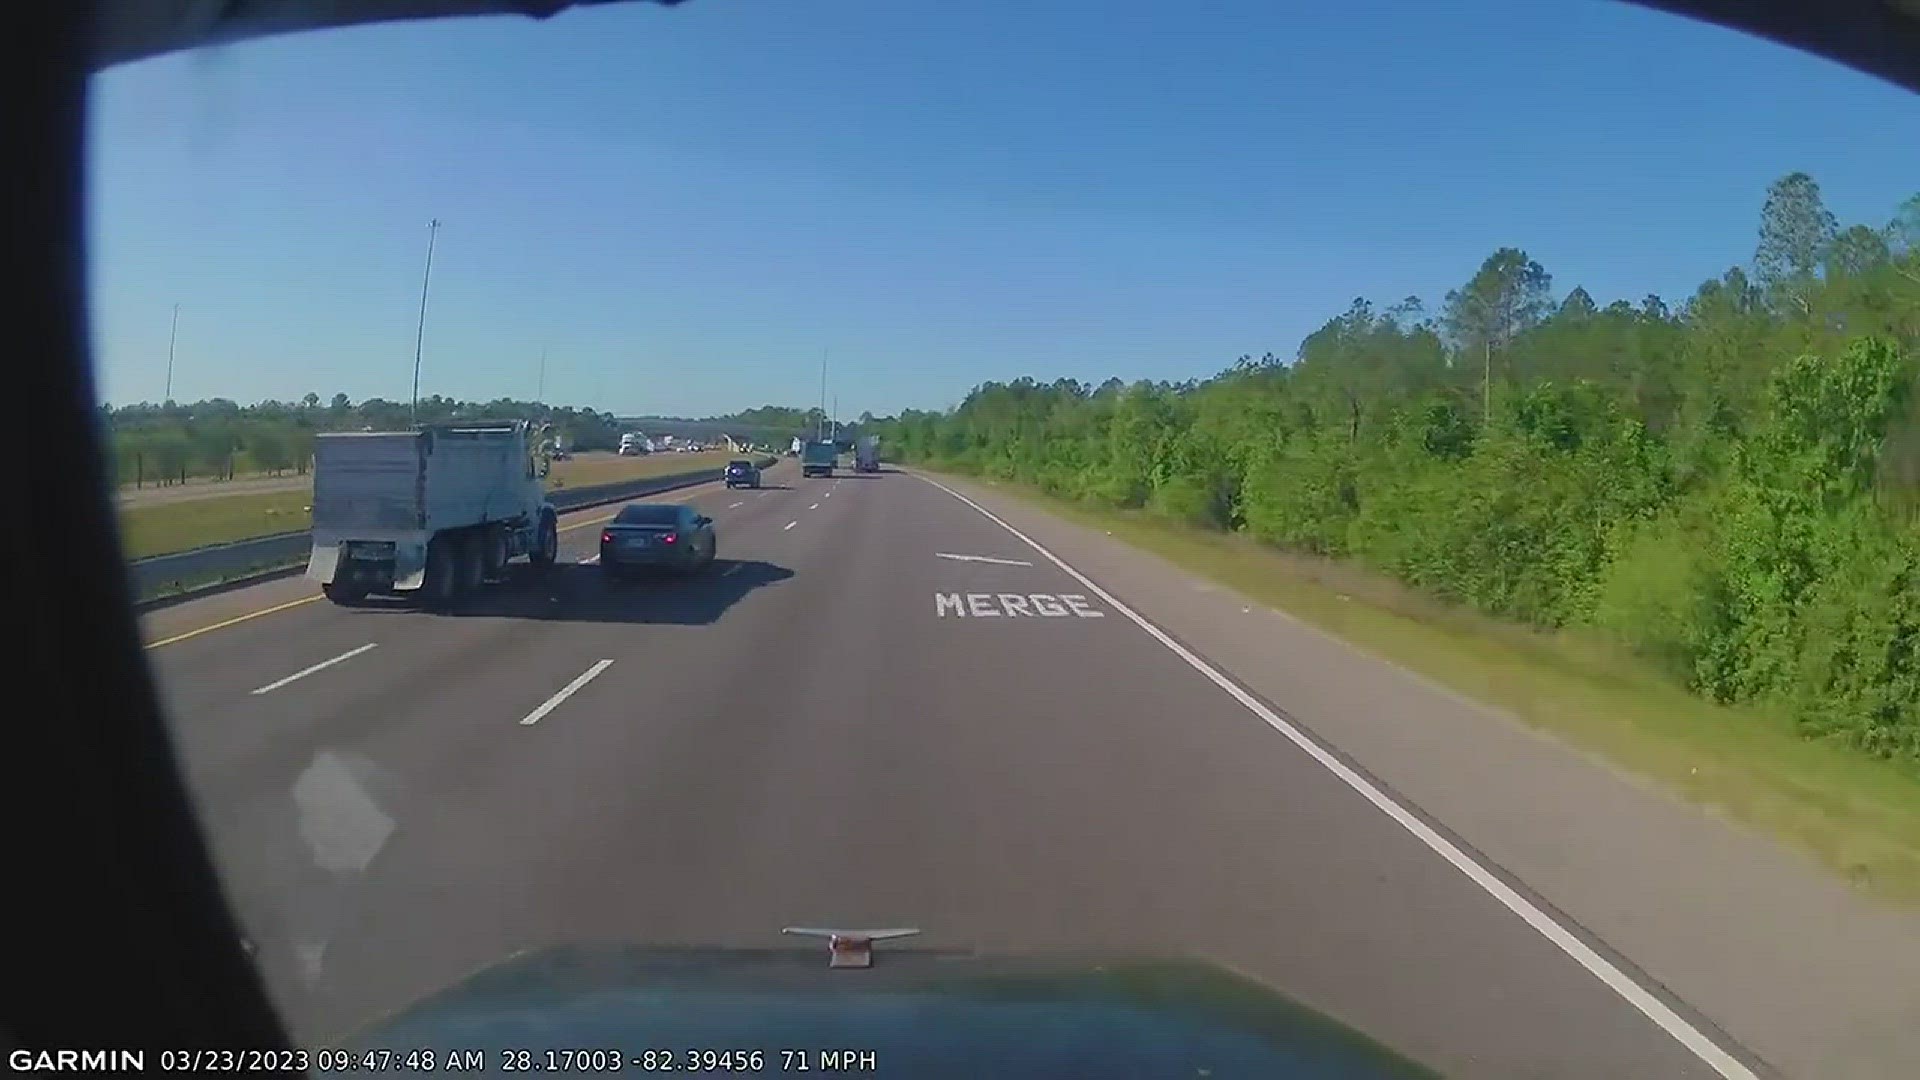 Florida Highway Patrol troopers are looking for a driver of a Toyota sedan who "cut off a dump truck" on I-75 causing a crash involving two semis.